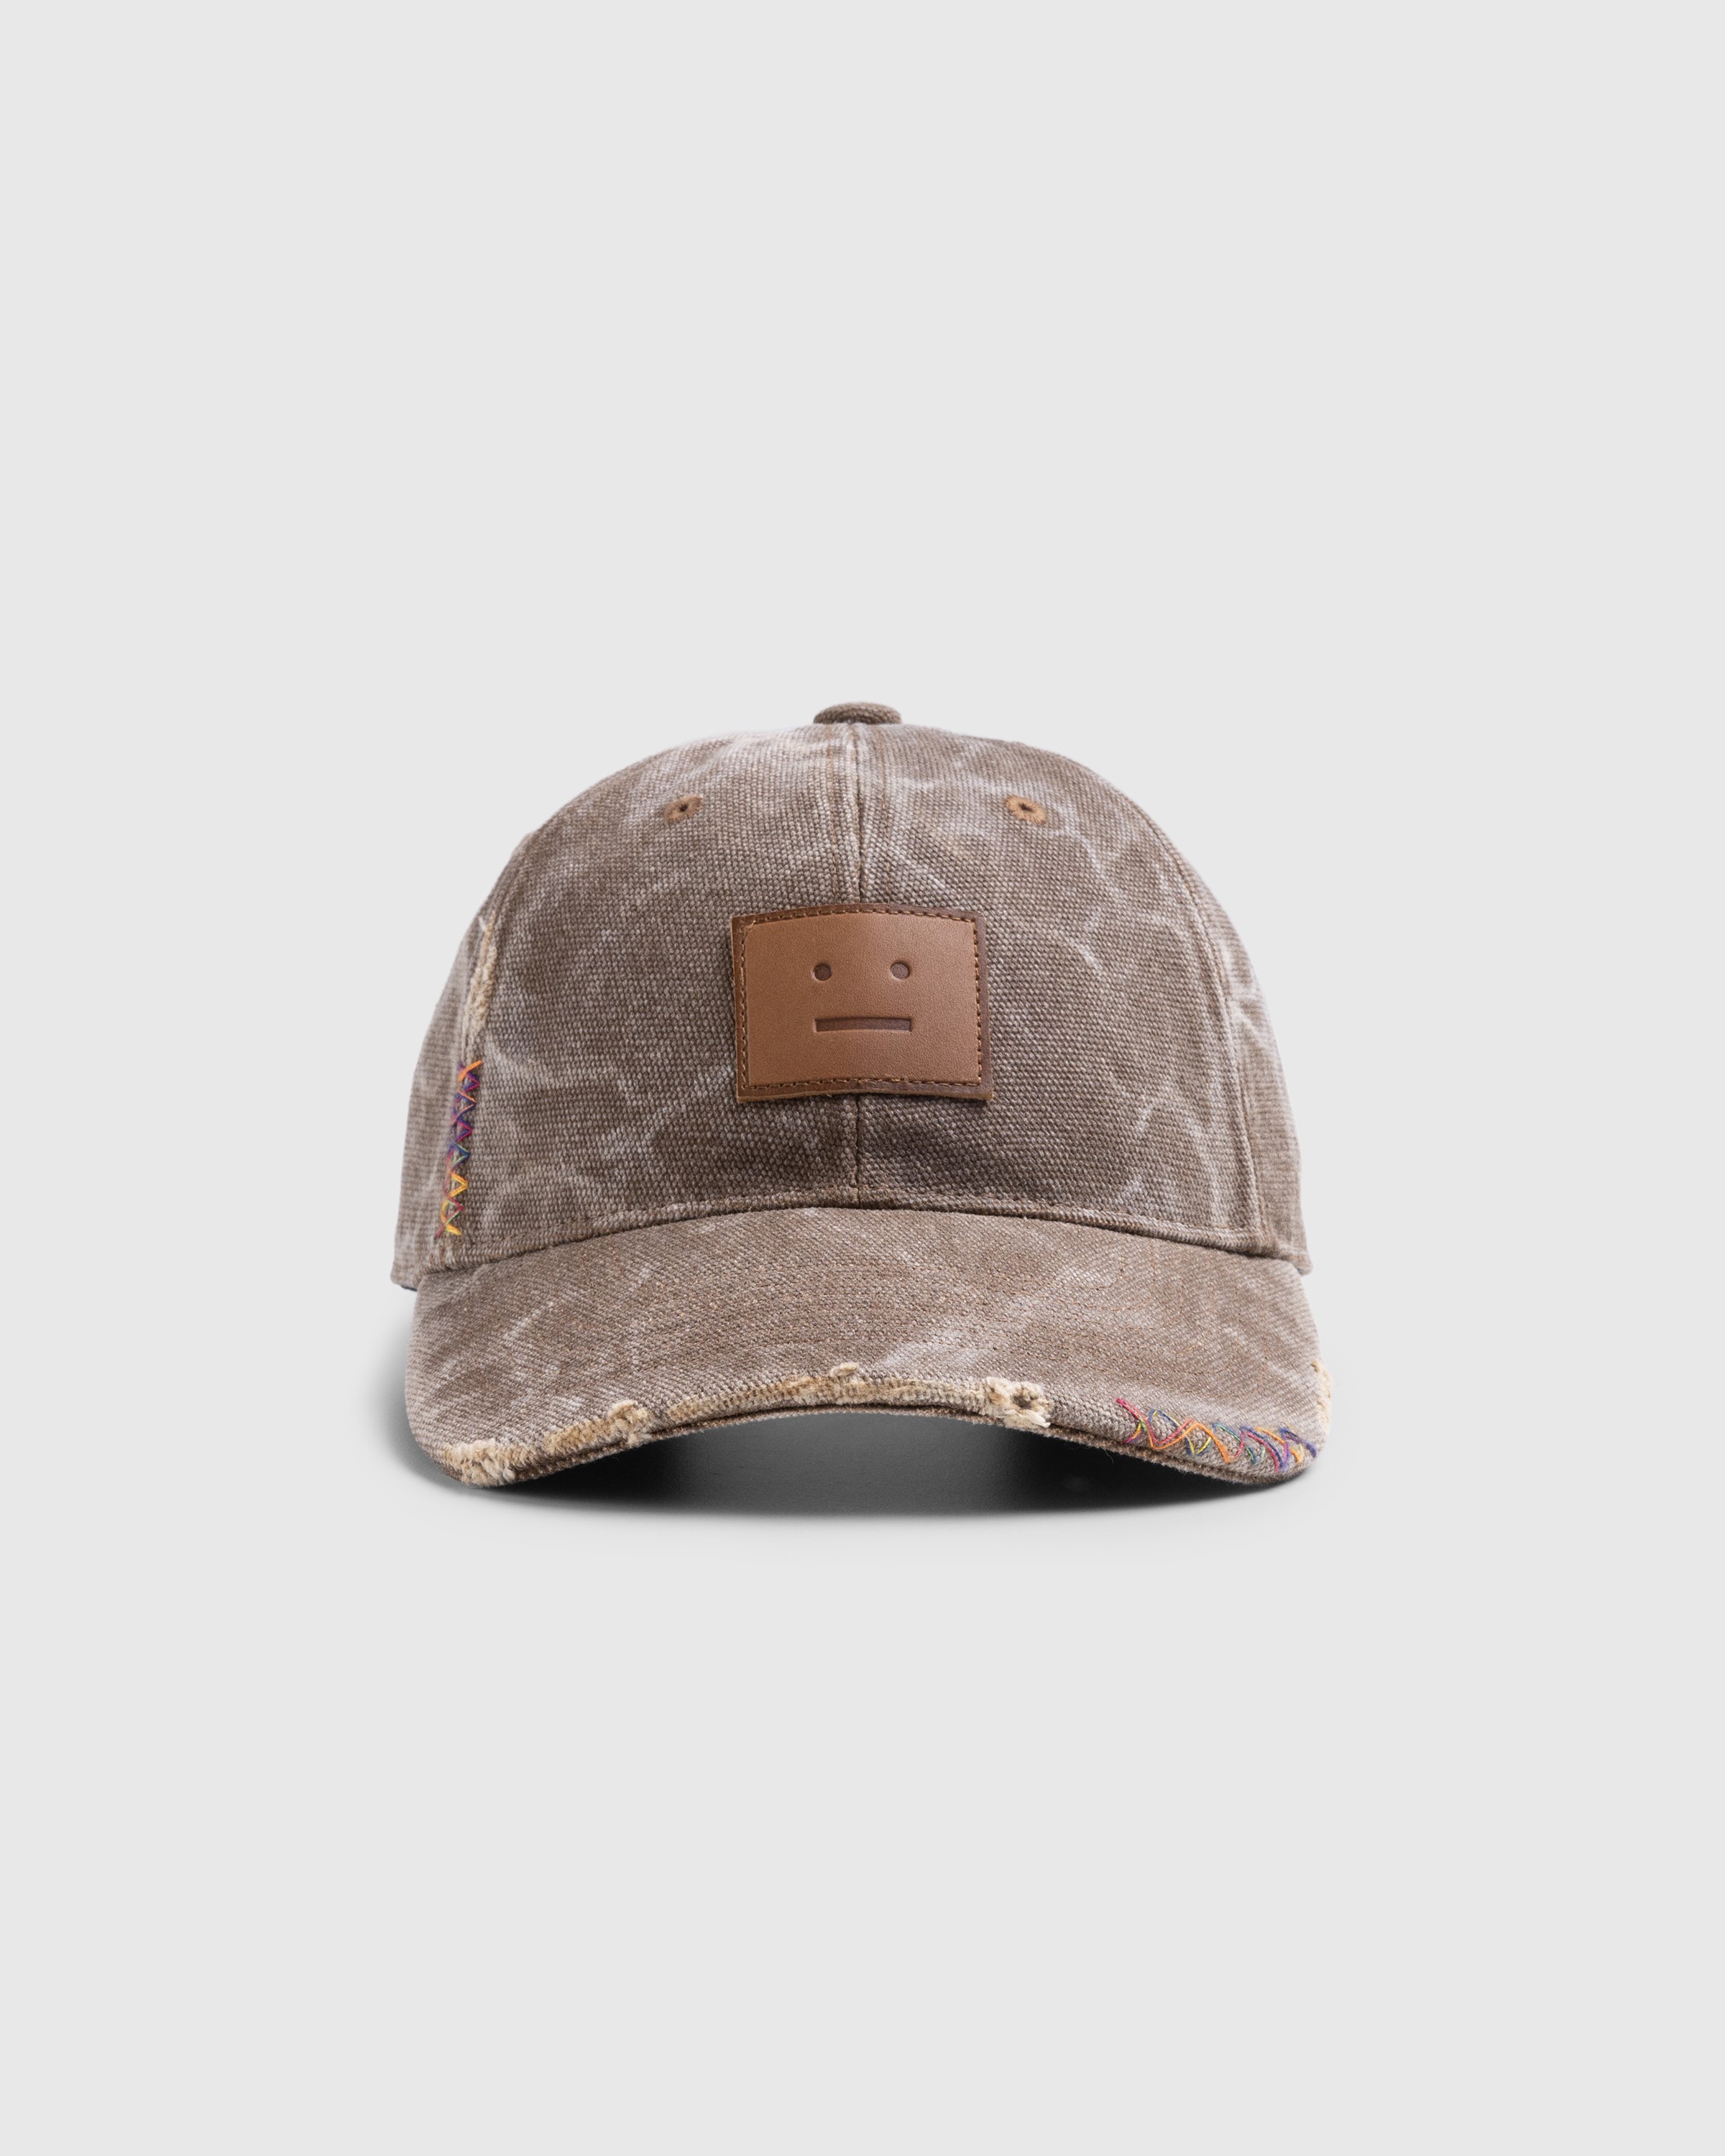 Acne Studios - Leather Face Patch Cap Toffee Brown - Accessories - Brown - Image 2